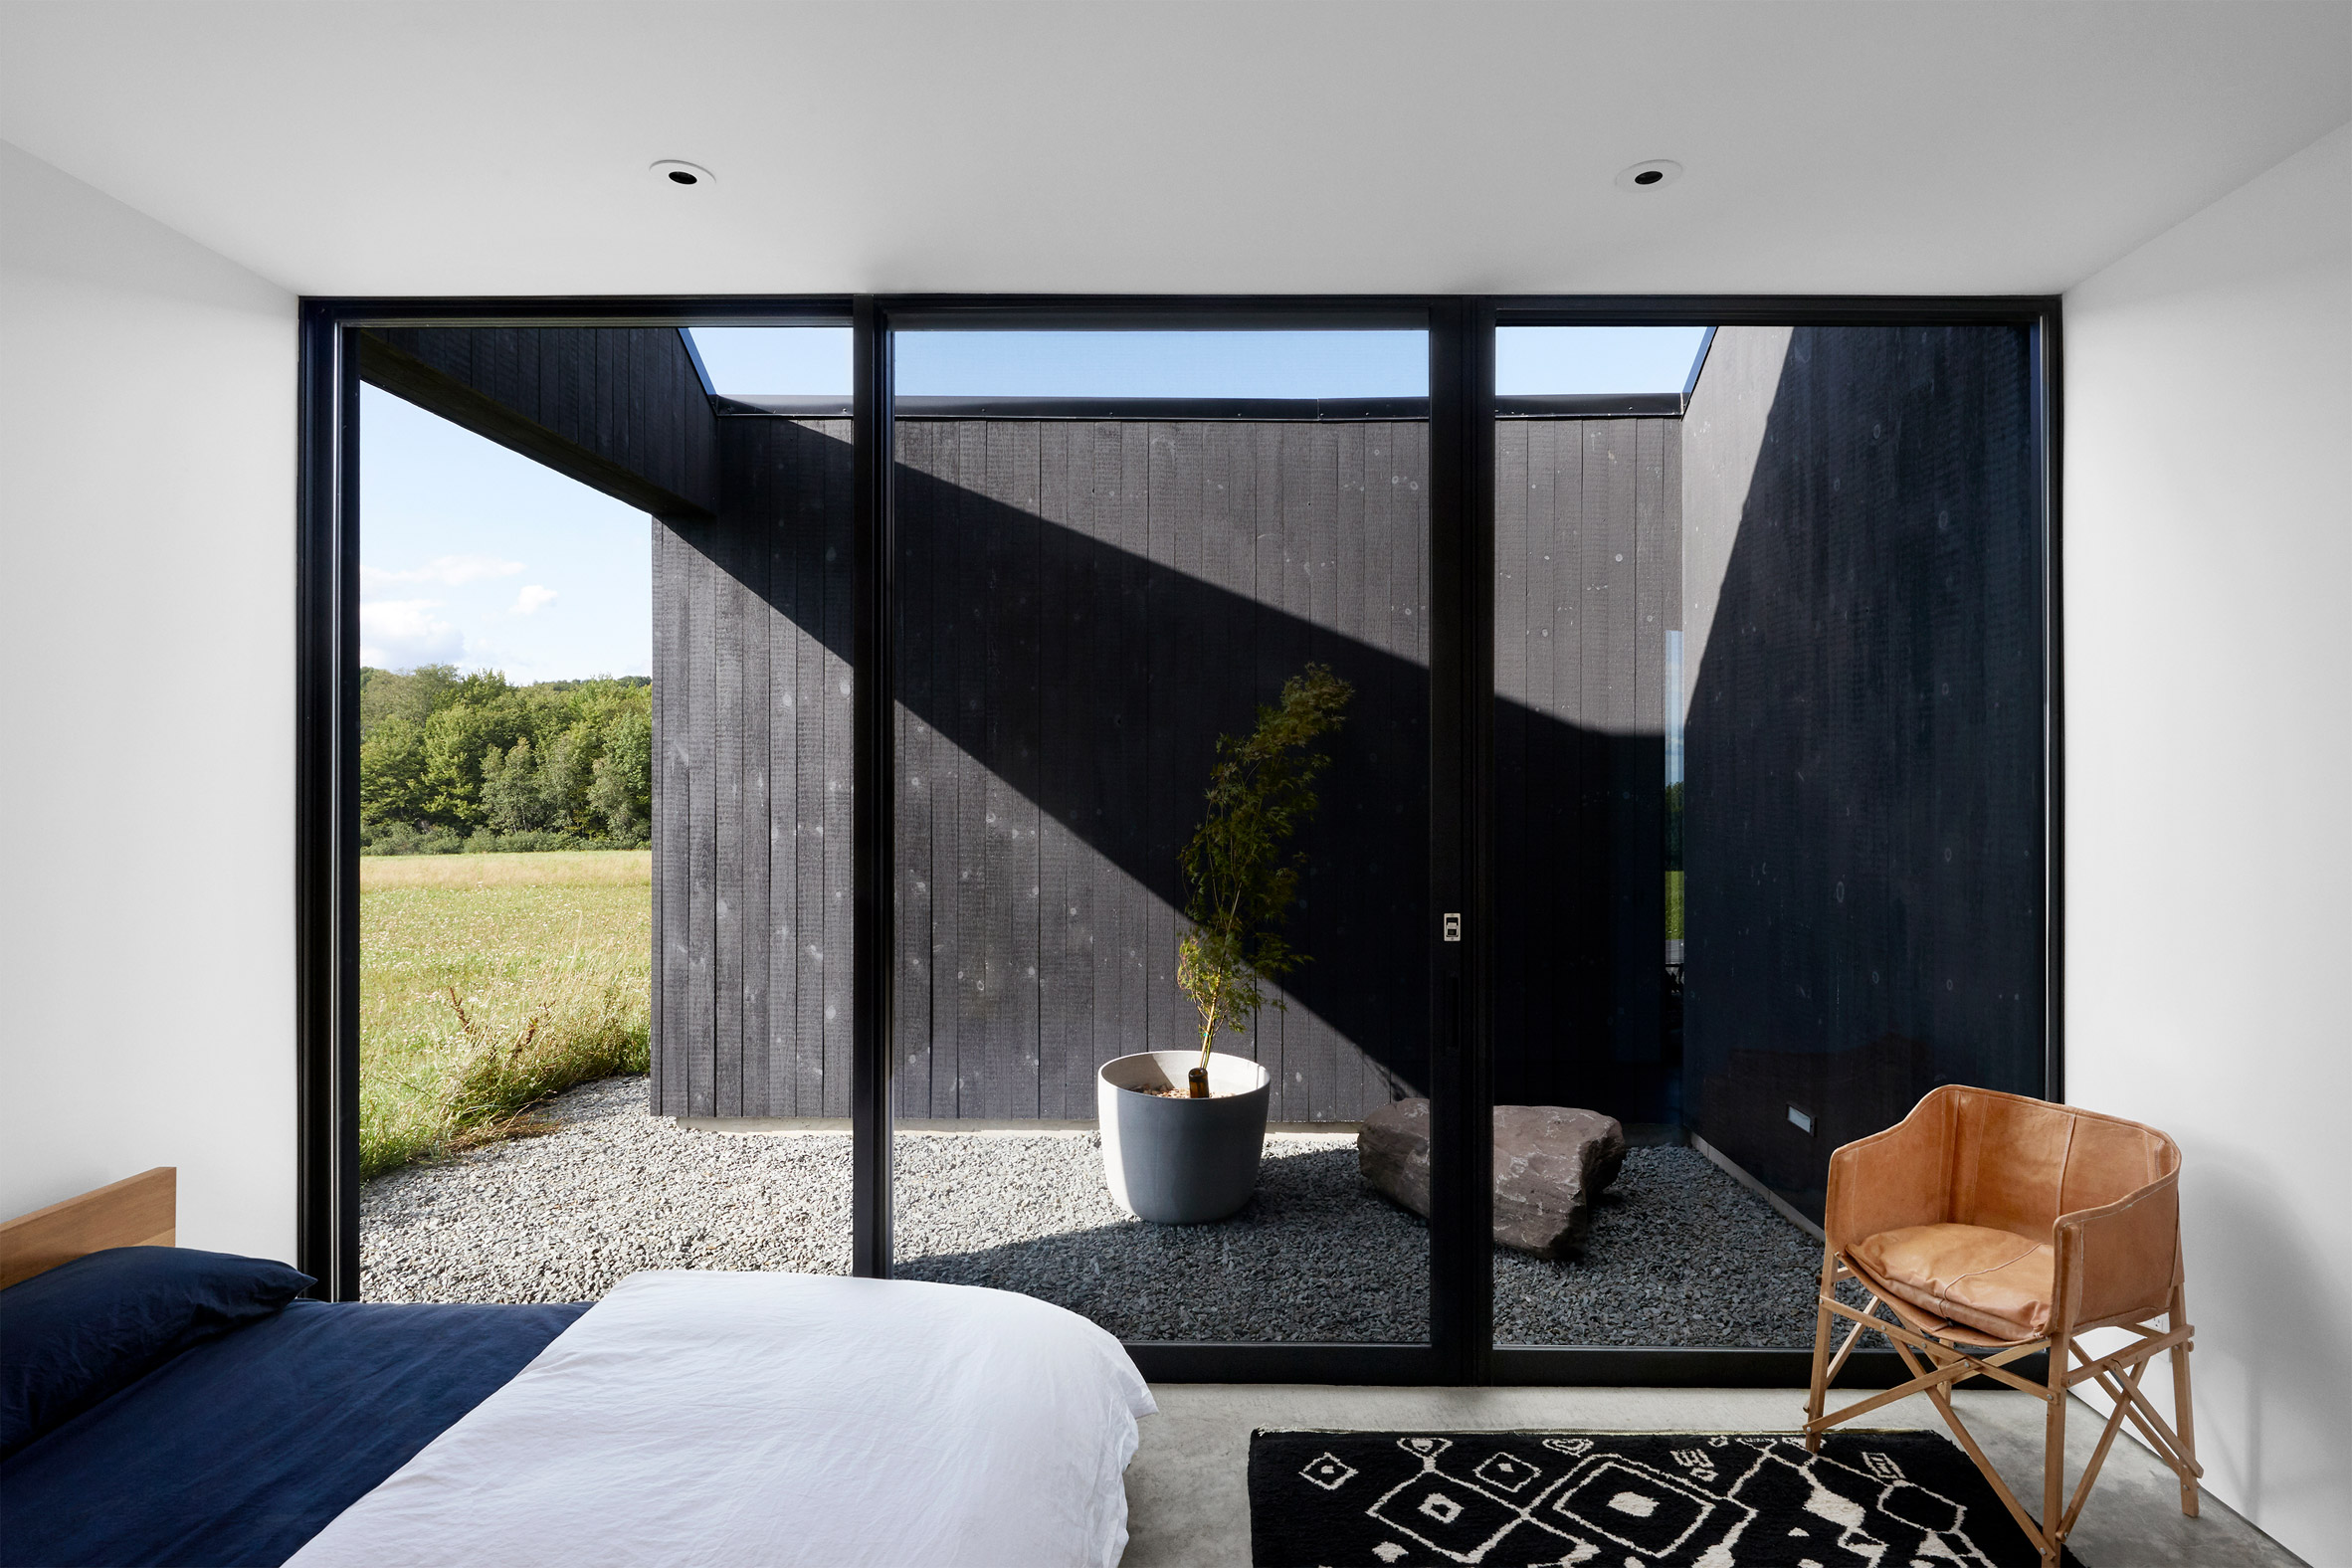 Hass House by Feuerstein Quagliara